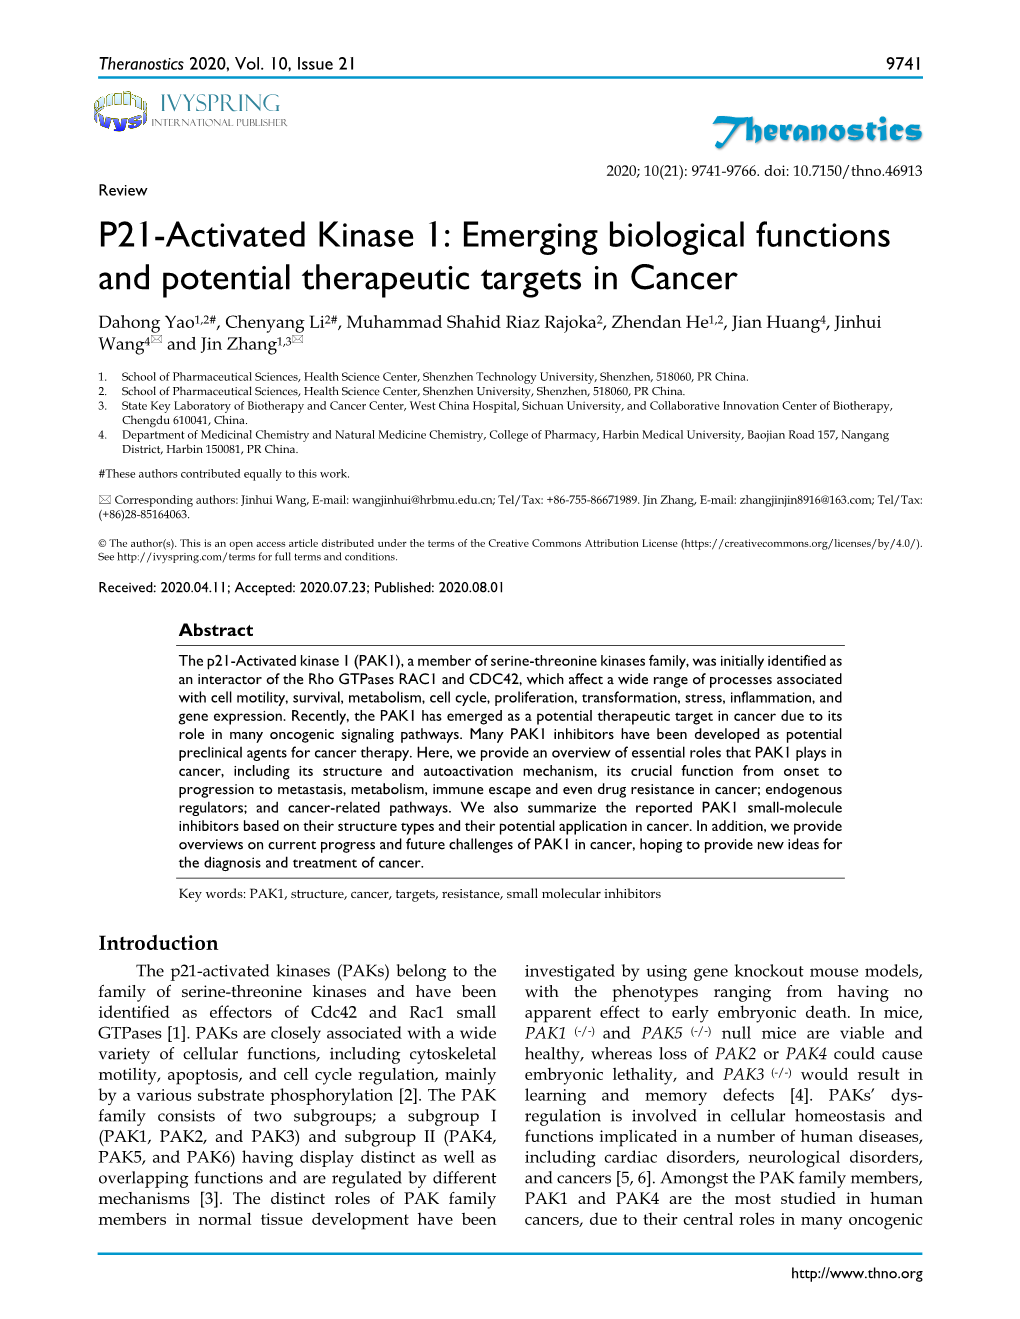 Theranostics P21-Activated Kinase 1: Emerging Biological Functions And